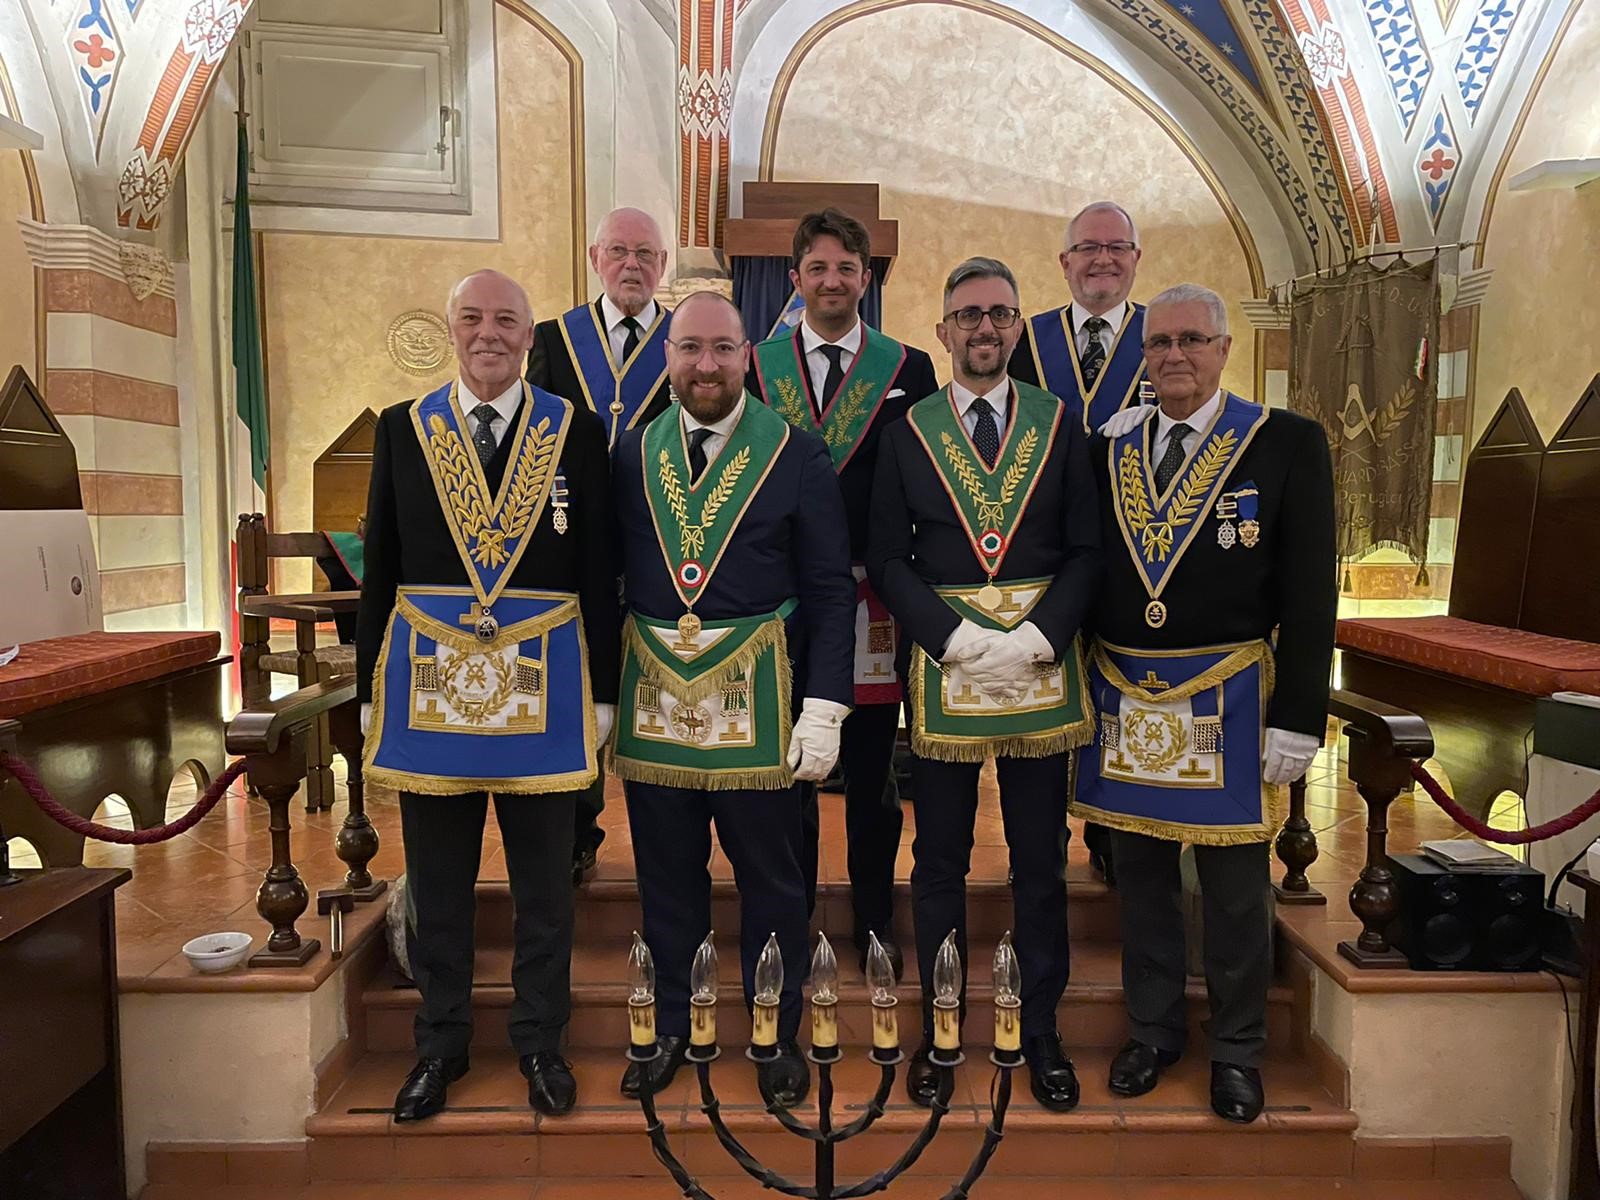 Devonshire Freemasons Travel to a Lodge under Grand Oriente of Italy